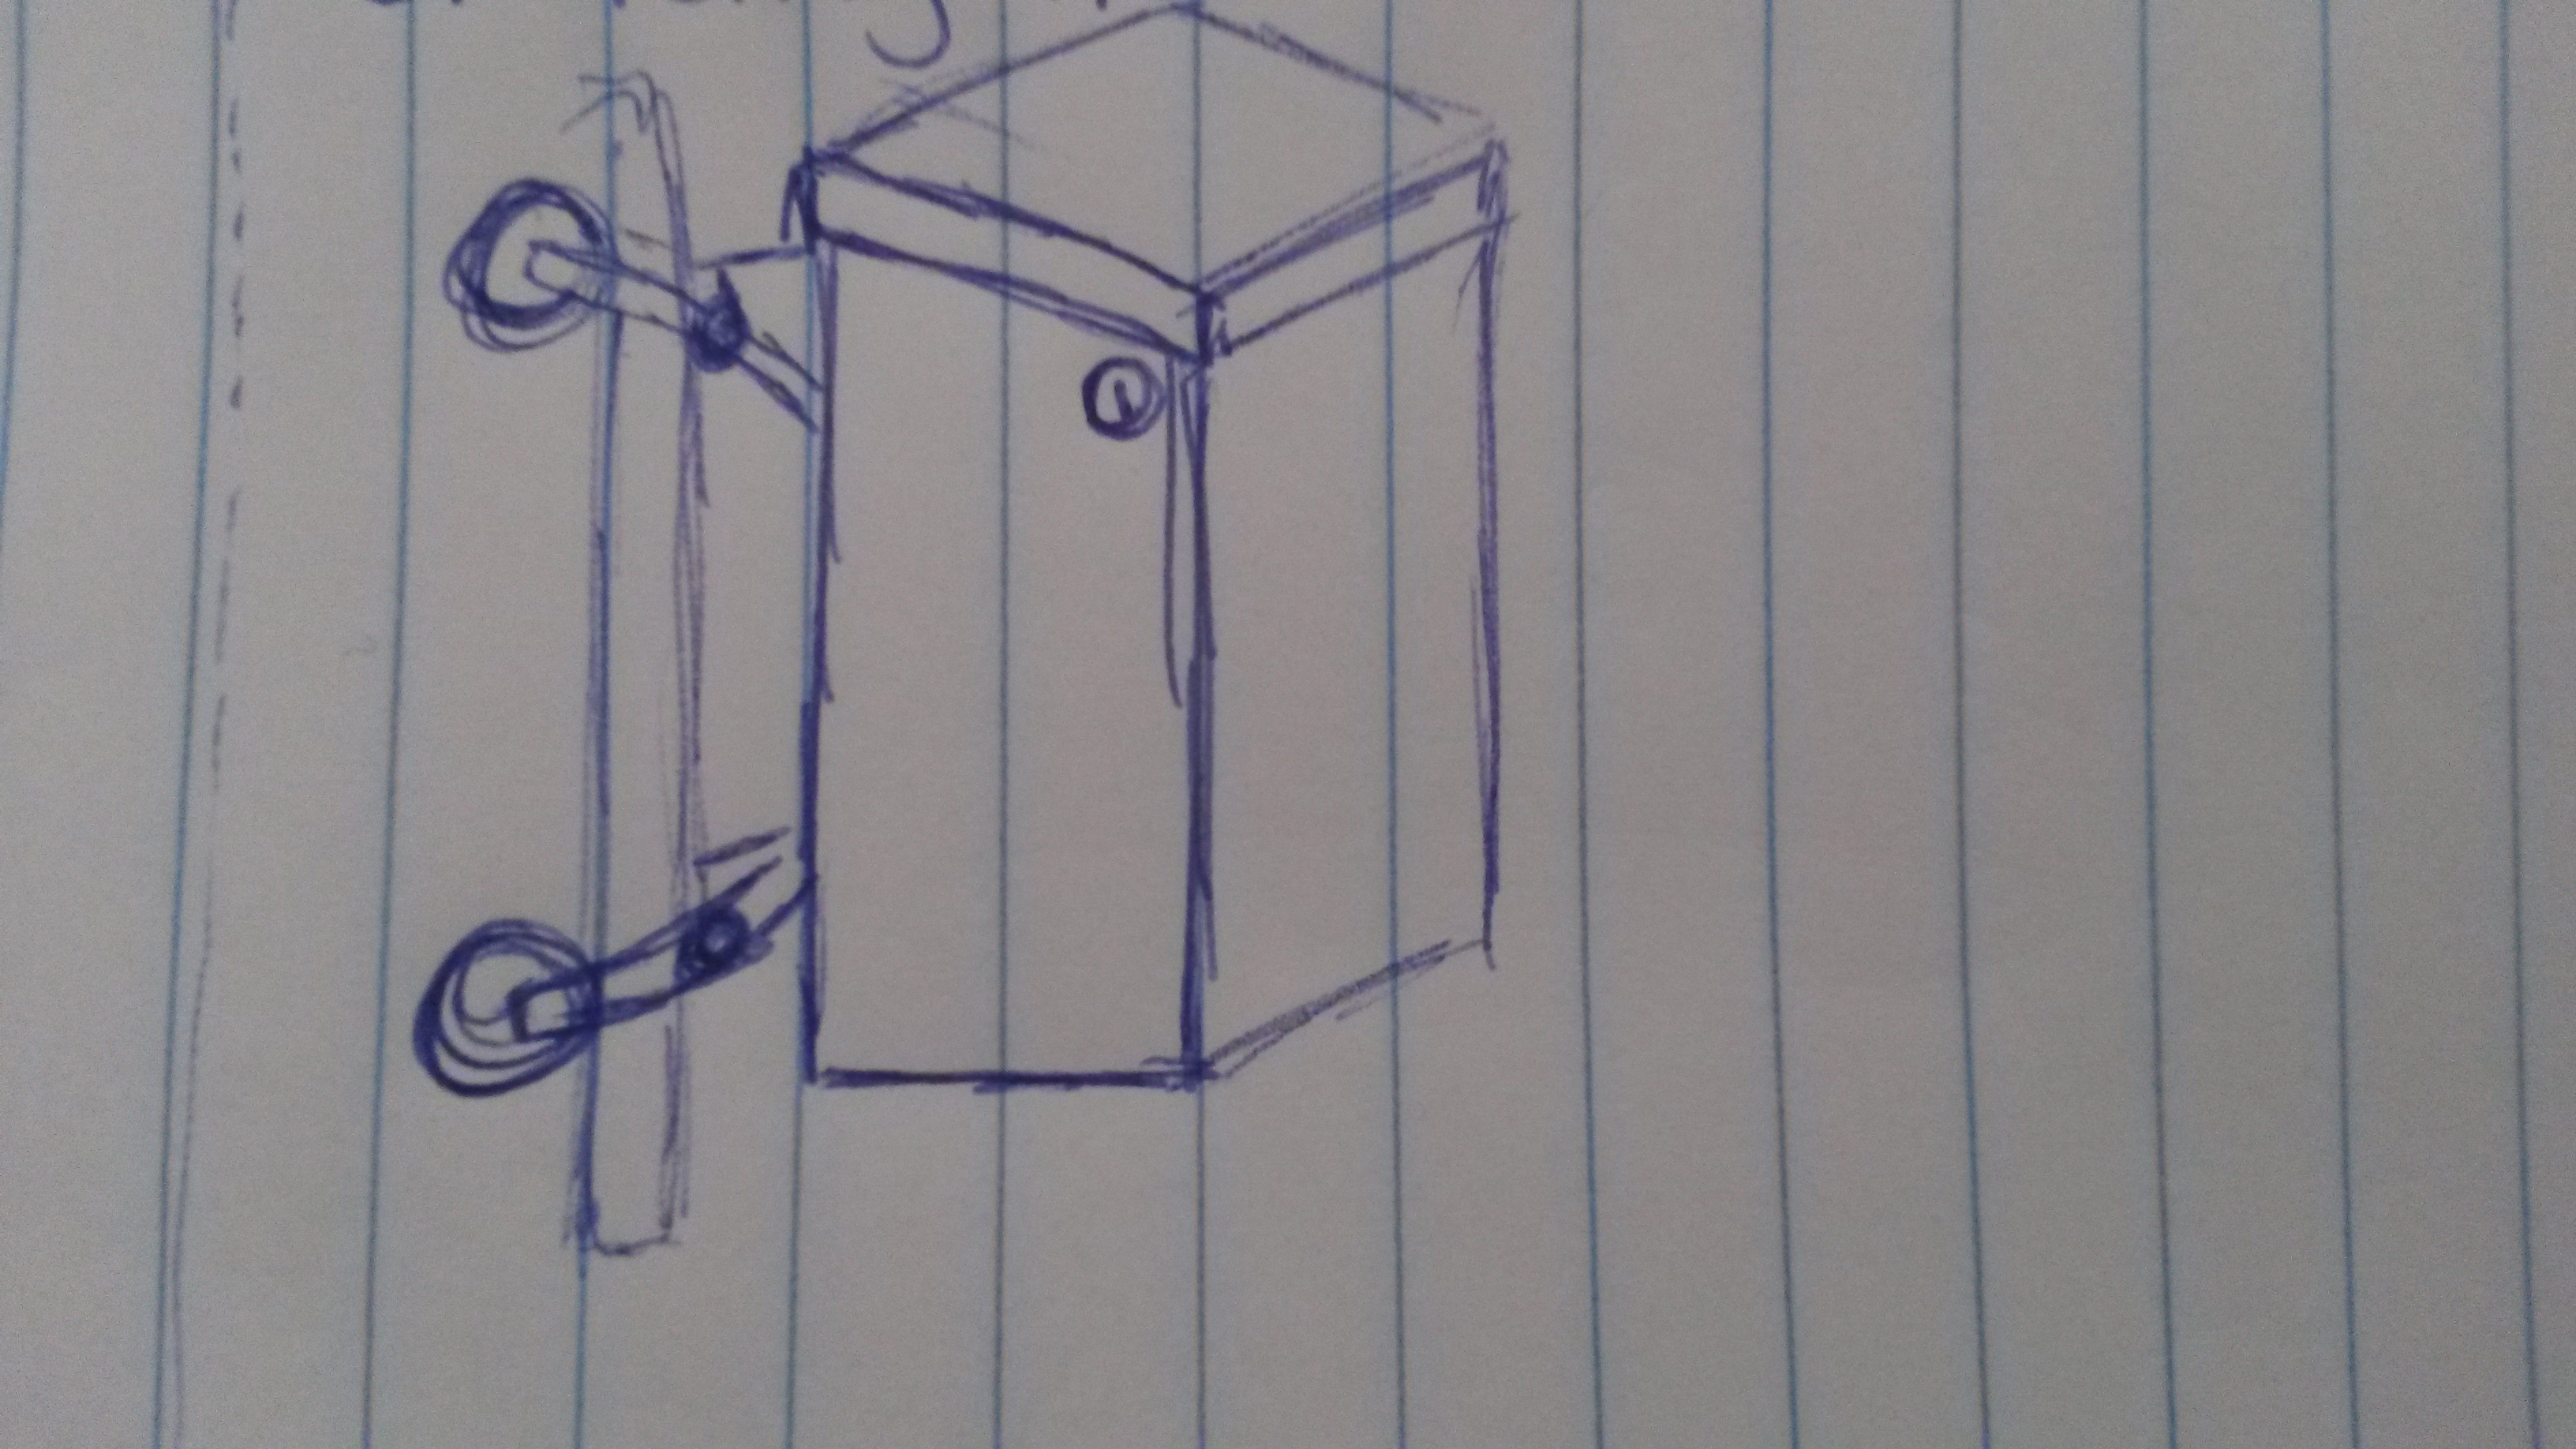 File:Group1-PerchMailboxDetailSketch1.jpeg